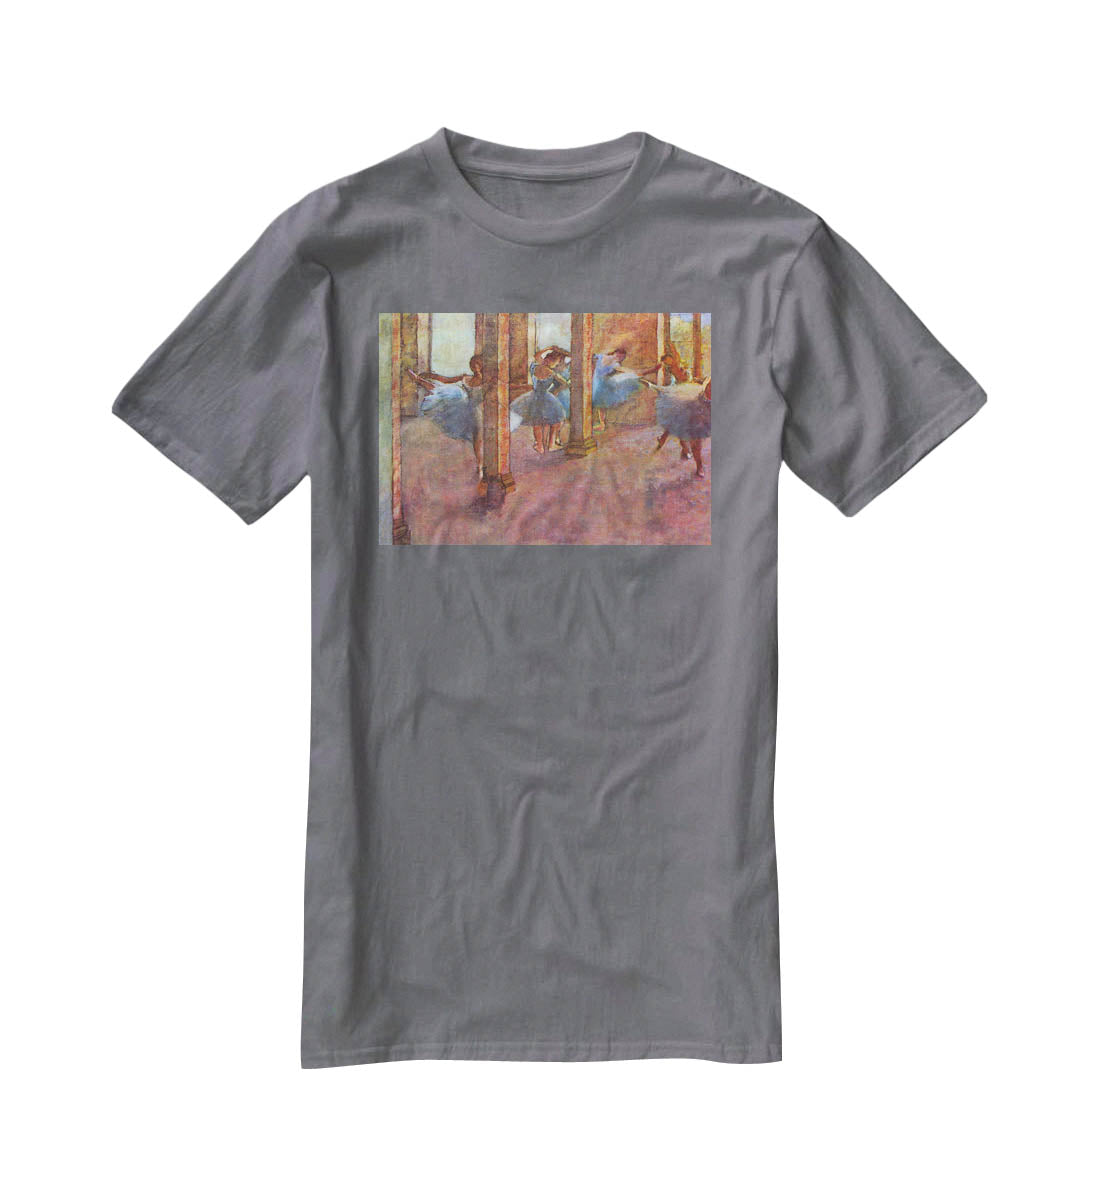 Dancers in the Foyer by Degas T-Shirt - Canvas Art Rocks - 3